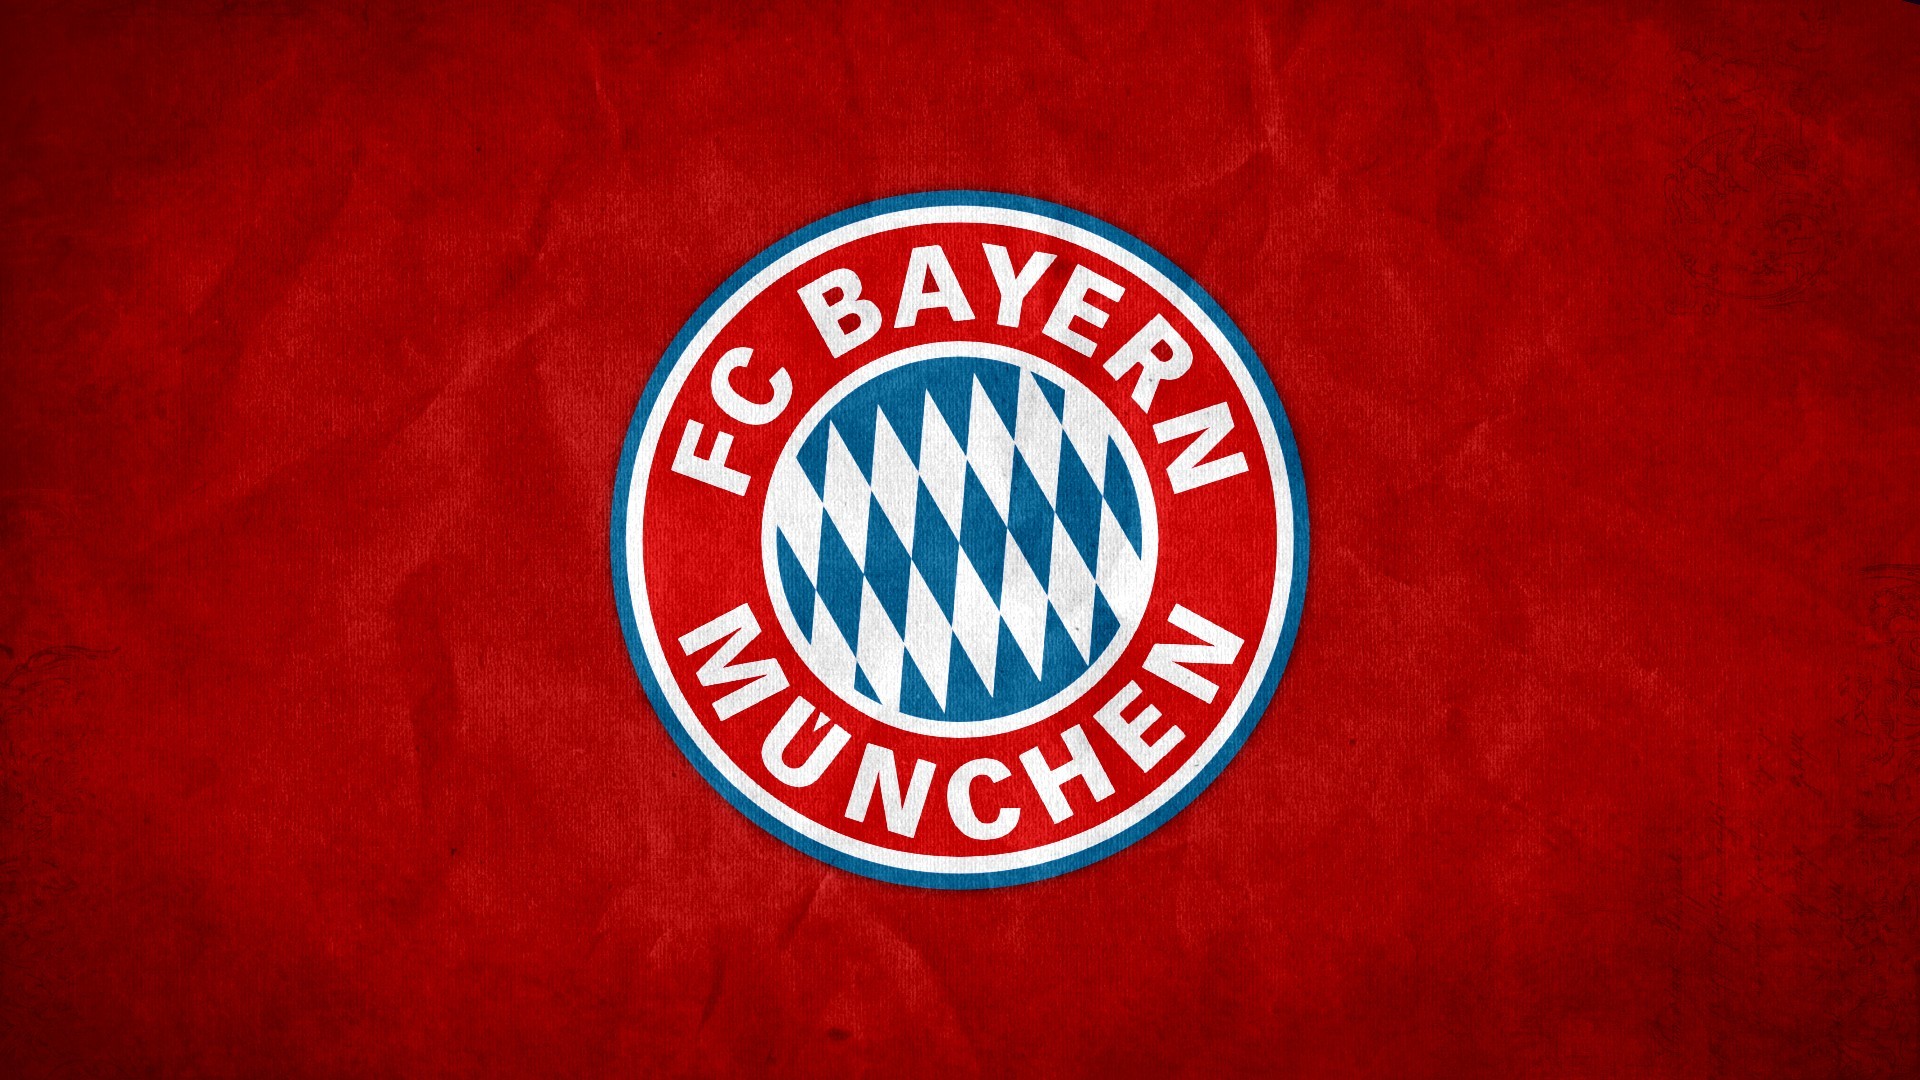 FC Bayern Munchen HD Wallpapers With Resolution 1920X1080 pixel. You can make this wallpaper for your Mac or Windows Desktop Background, iPhone, Android or Tablet and another Smartphone device for free